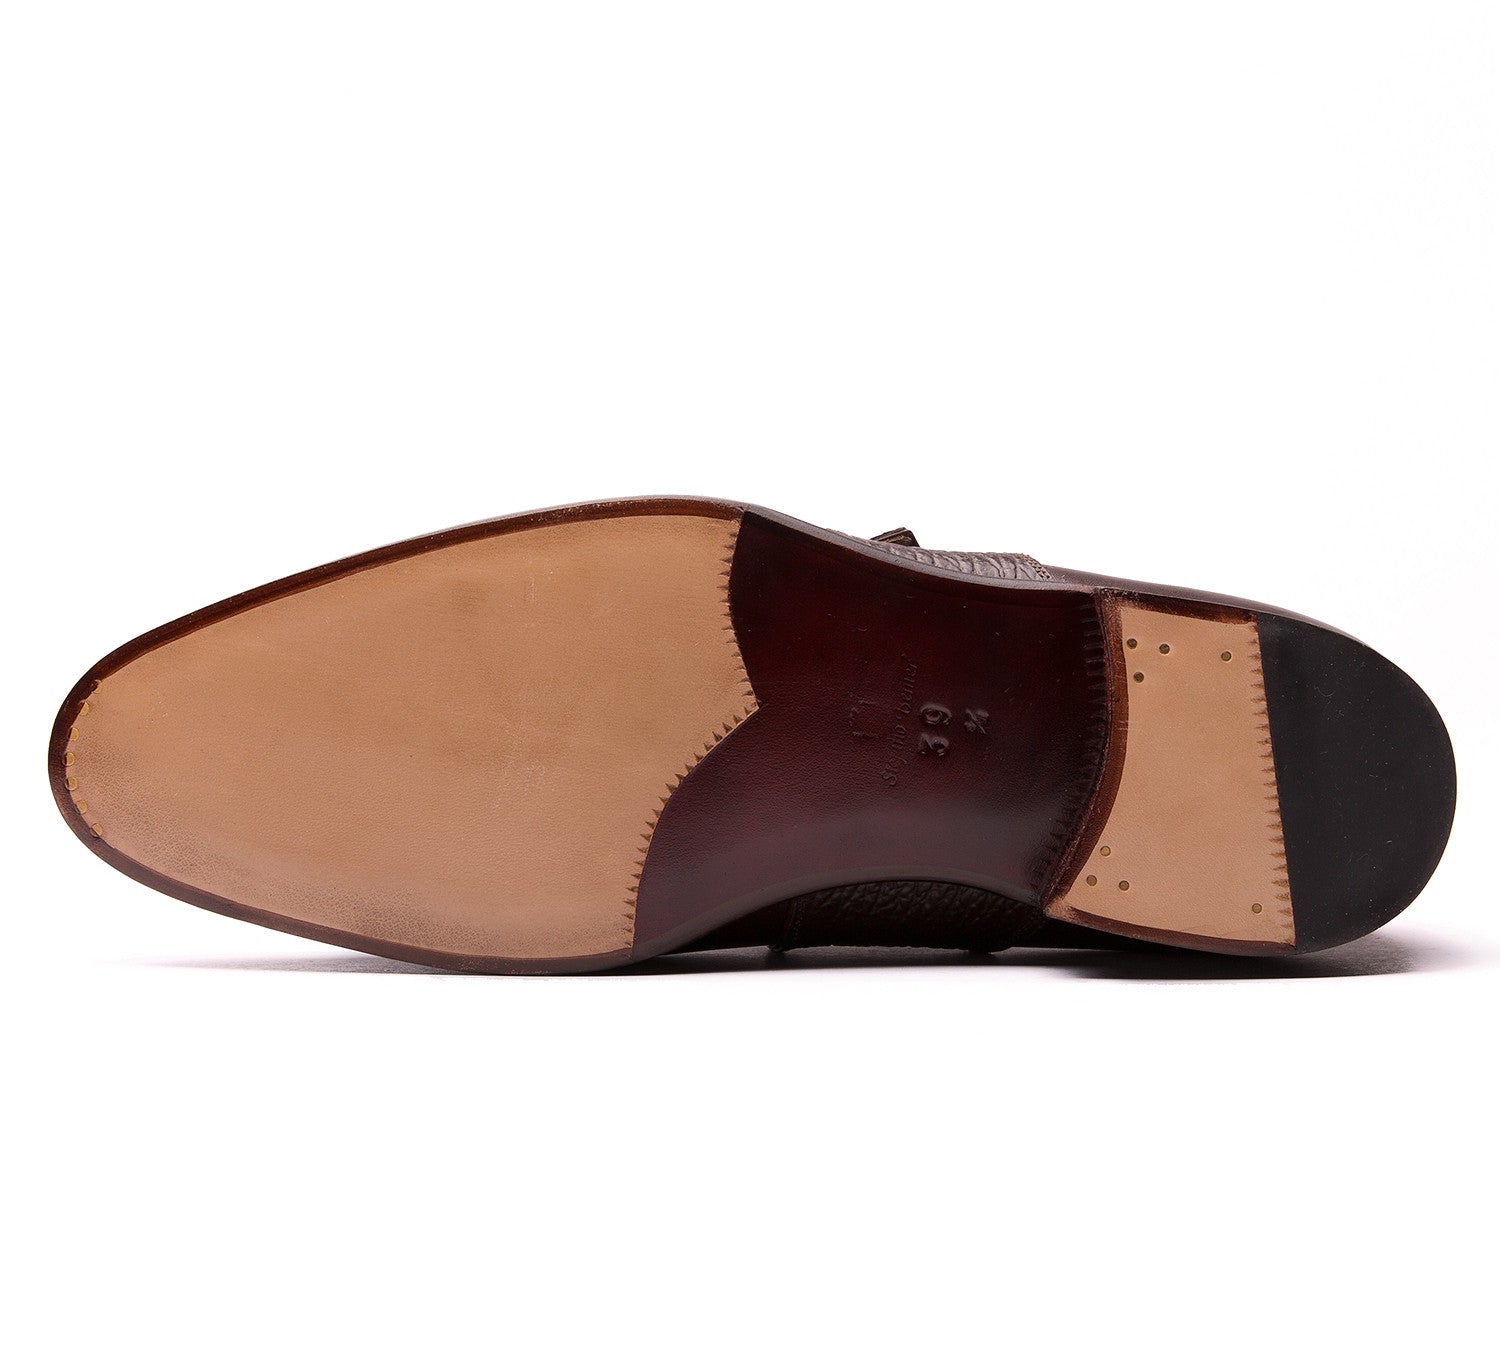 Stefano Bemer Style 2200 - Meleze Calf - Sole View